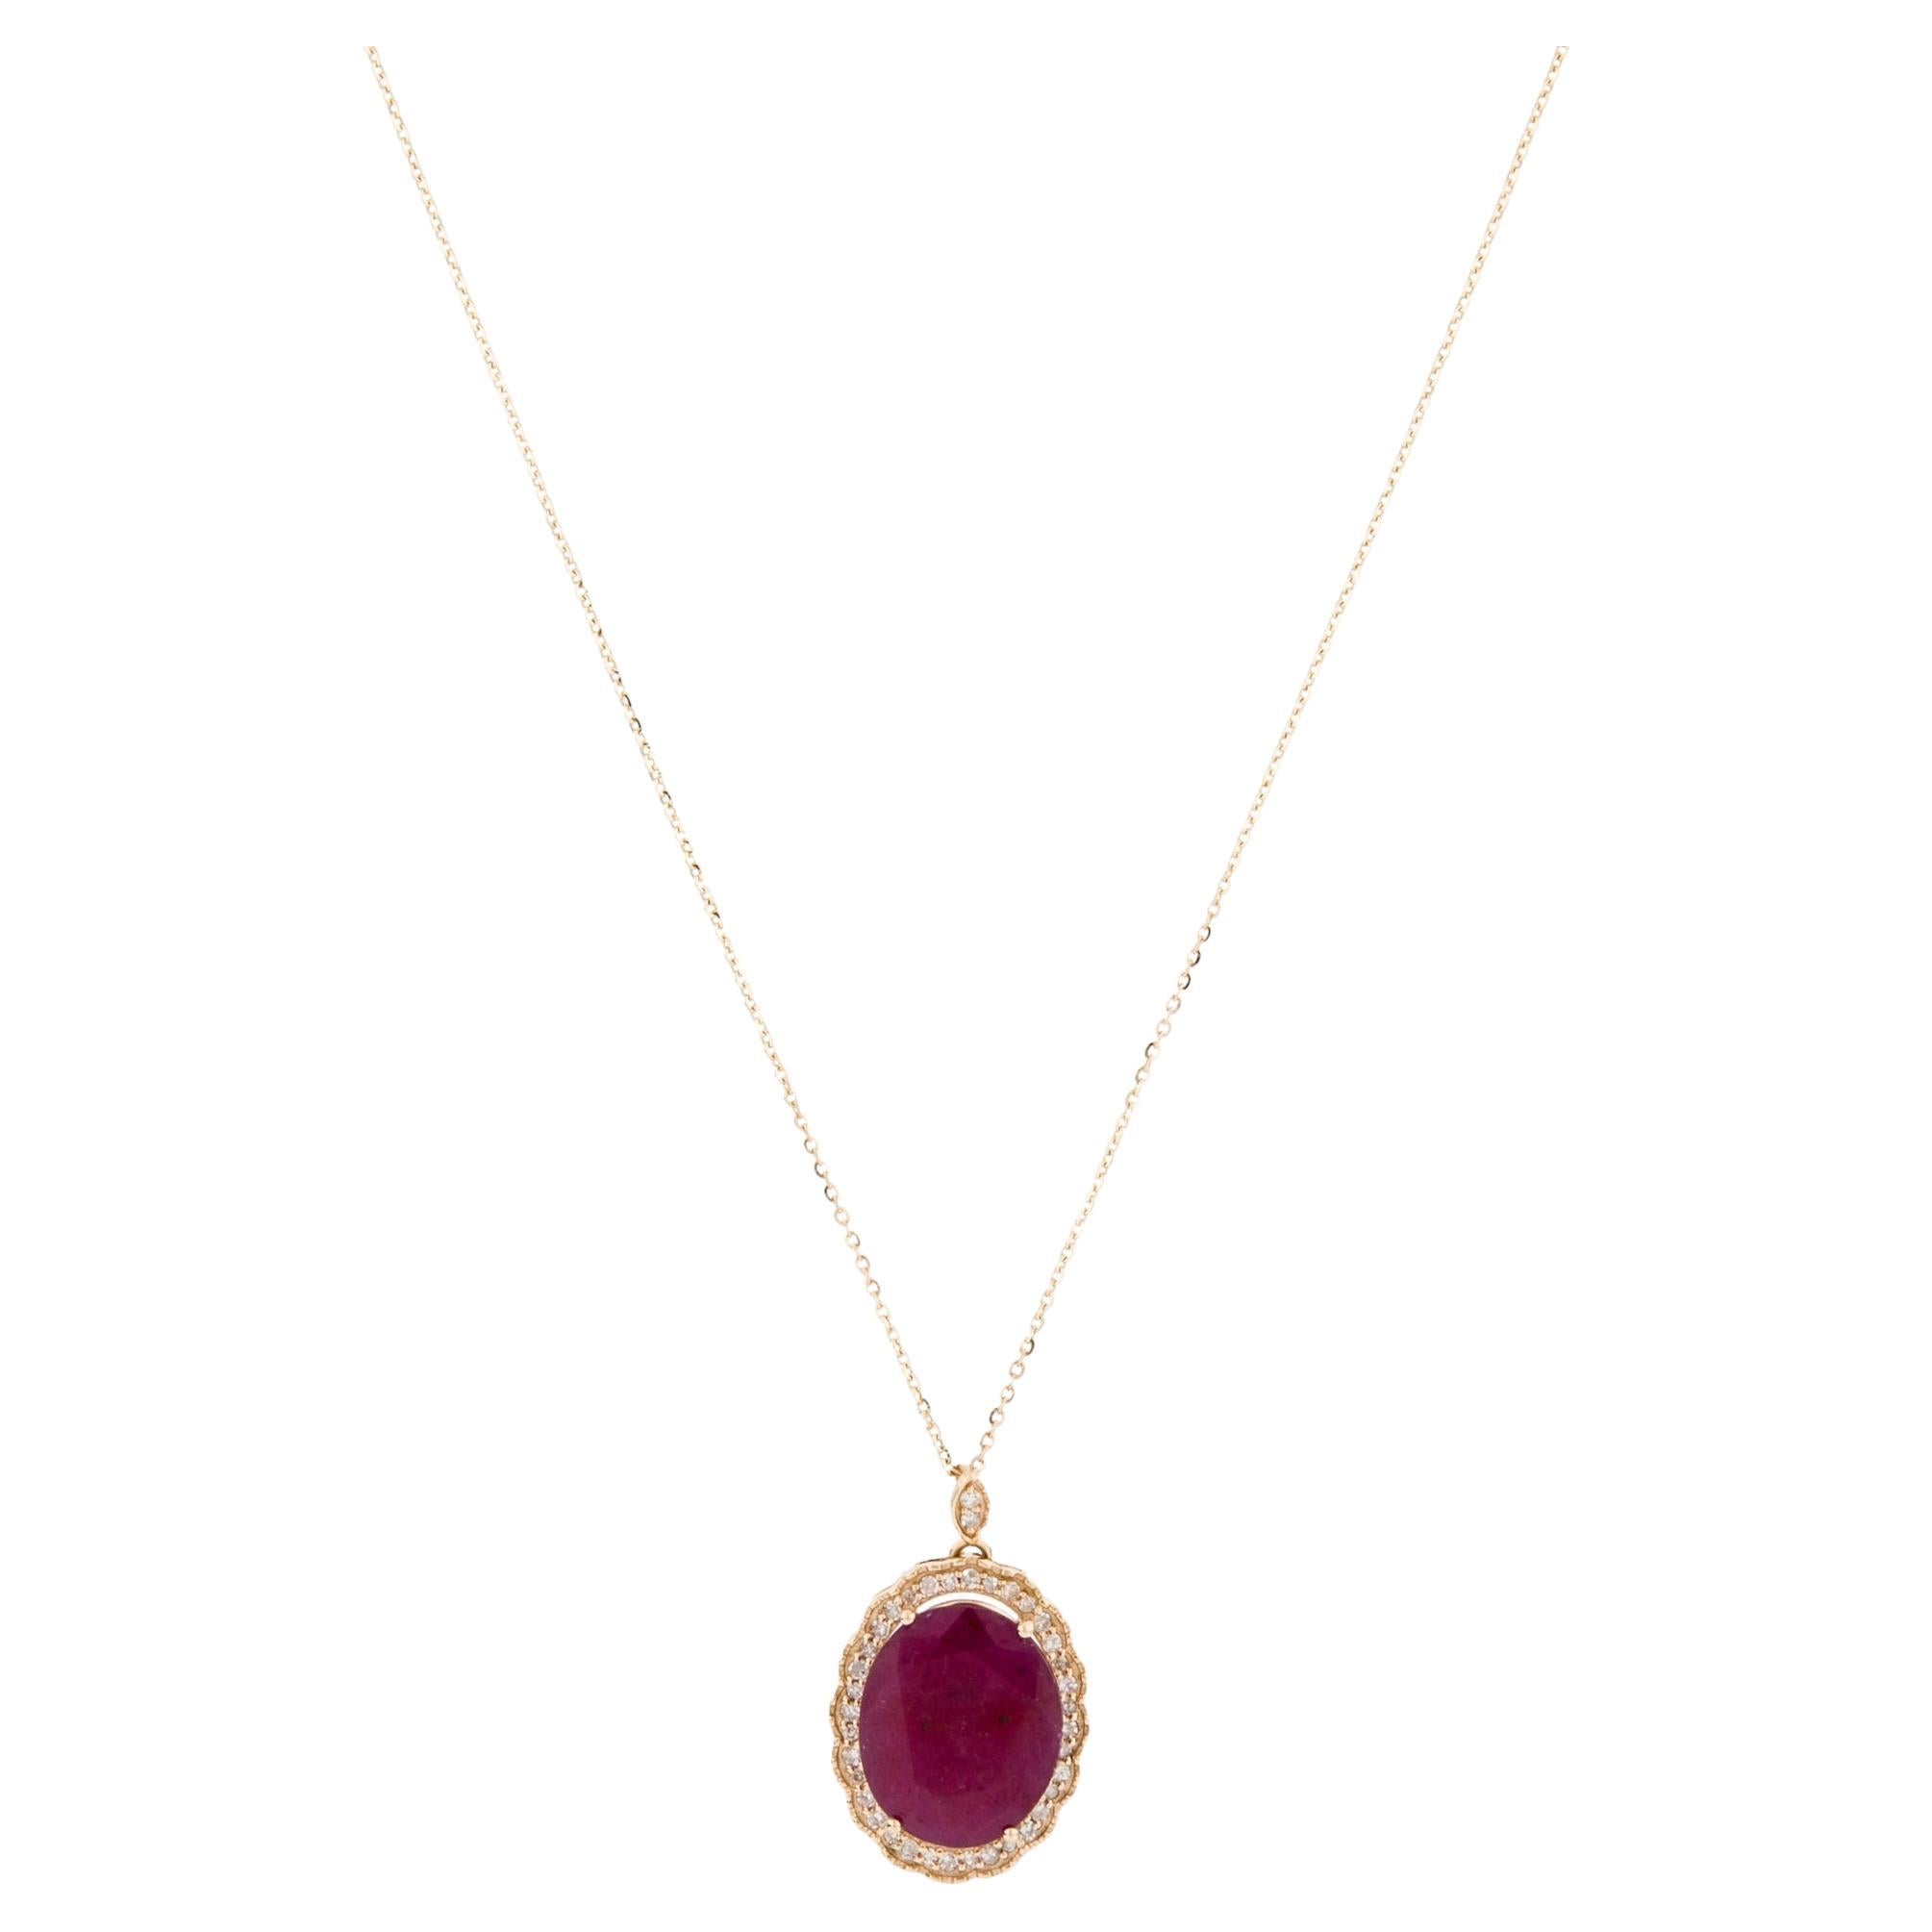 14K 3.79ct Ruby & Diamond Pendant Necklace: Exquisite Luxury Statement Jewelry For Sale